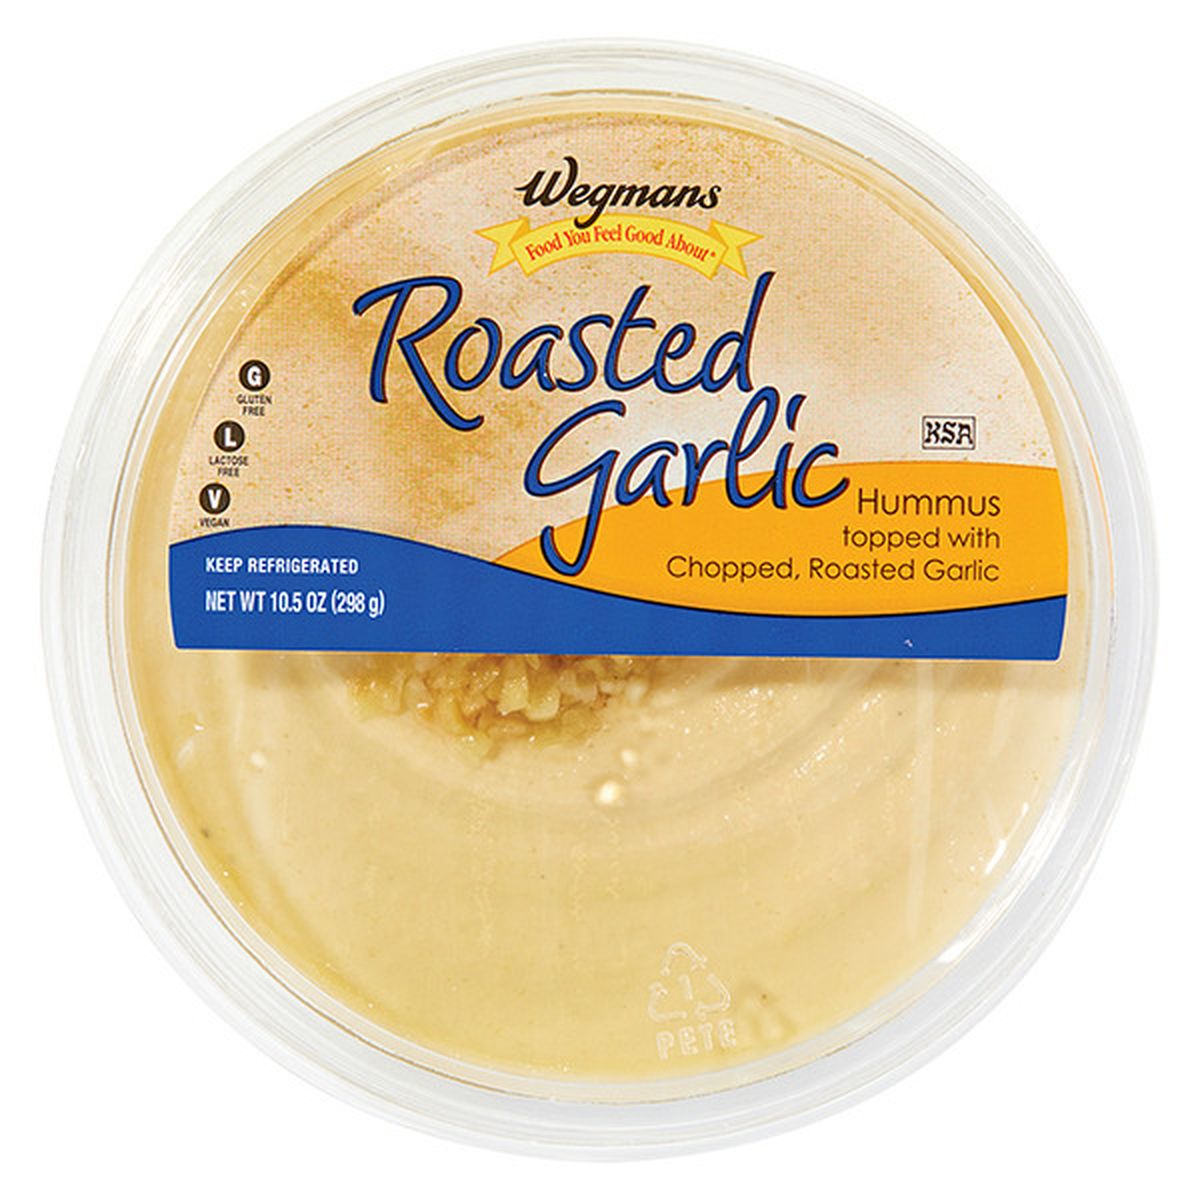 Calories in Wegmans Roasted Garlic Hummus Topped with Chopped Roasted Garlic